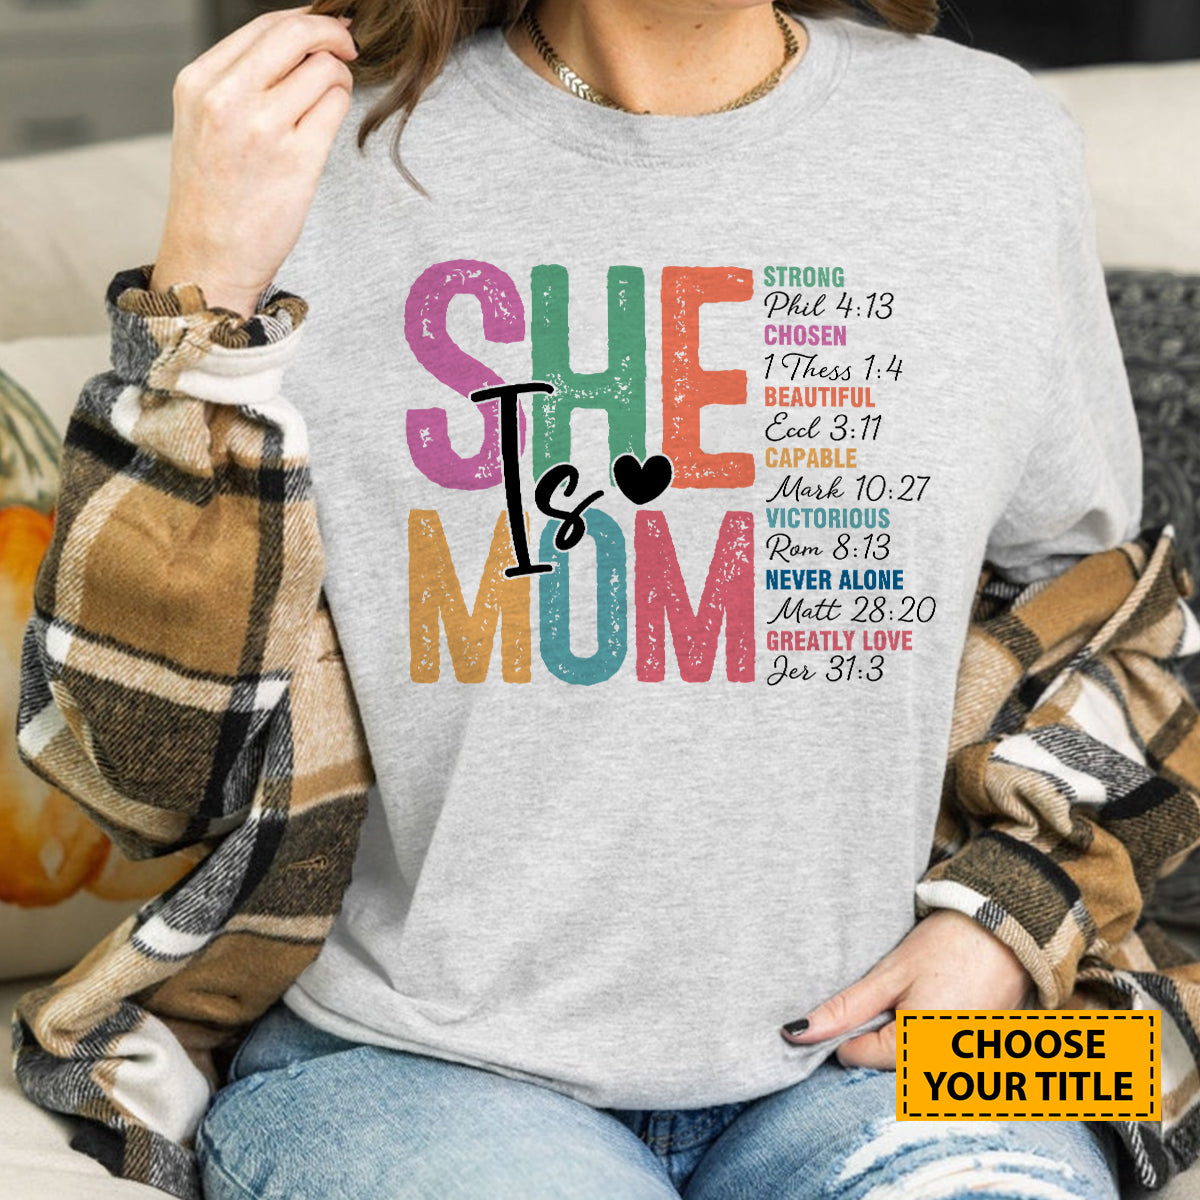 Teesdily | She Is Mom Customized Jesus Mommy Shirt, Jesus Lovers, Mother's Day Gift, Unisex Tshirt Size S-5xl